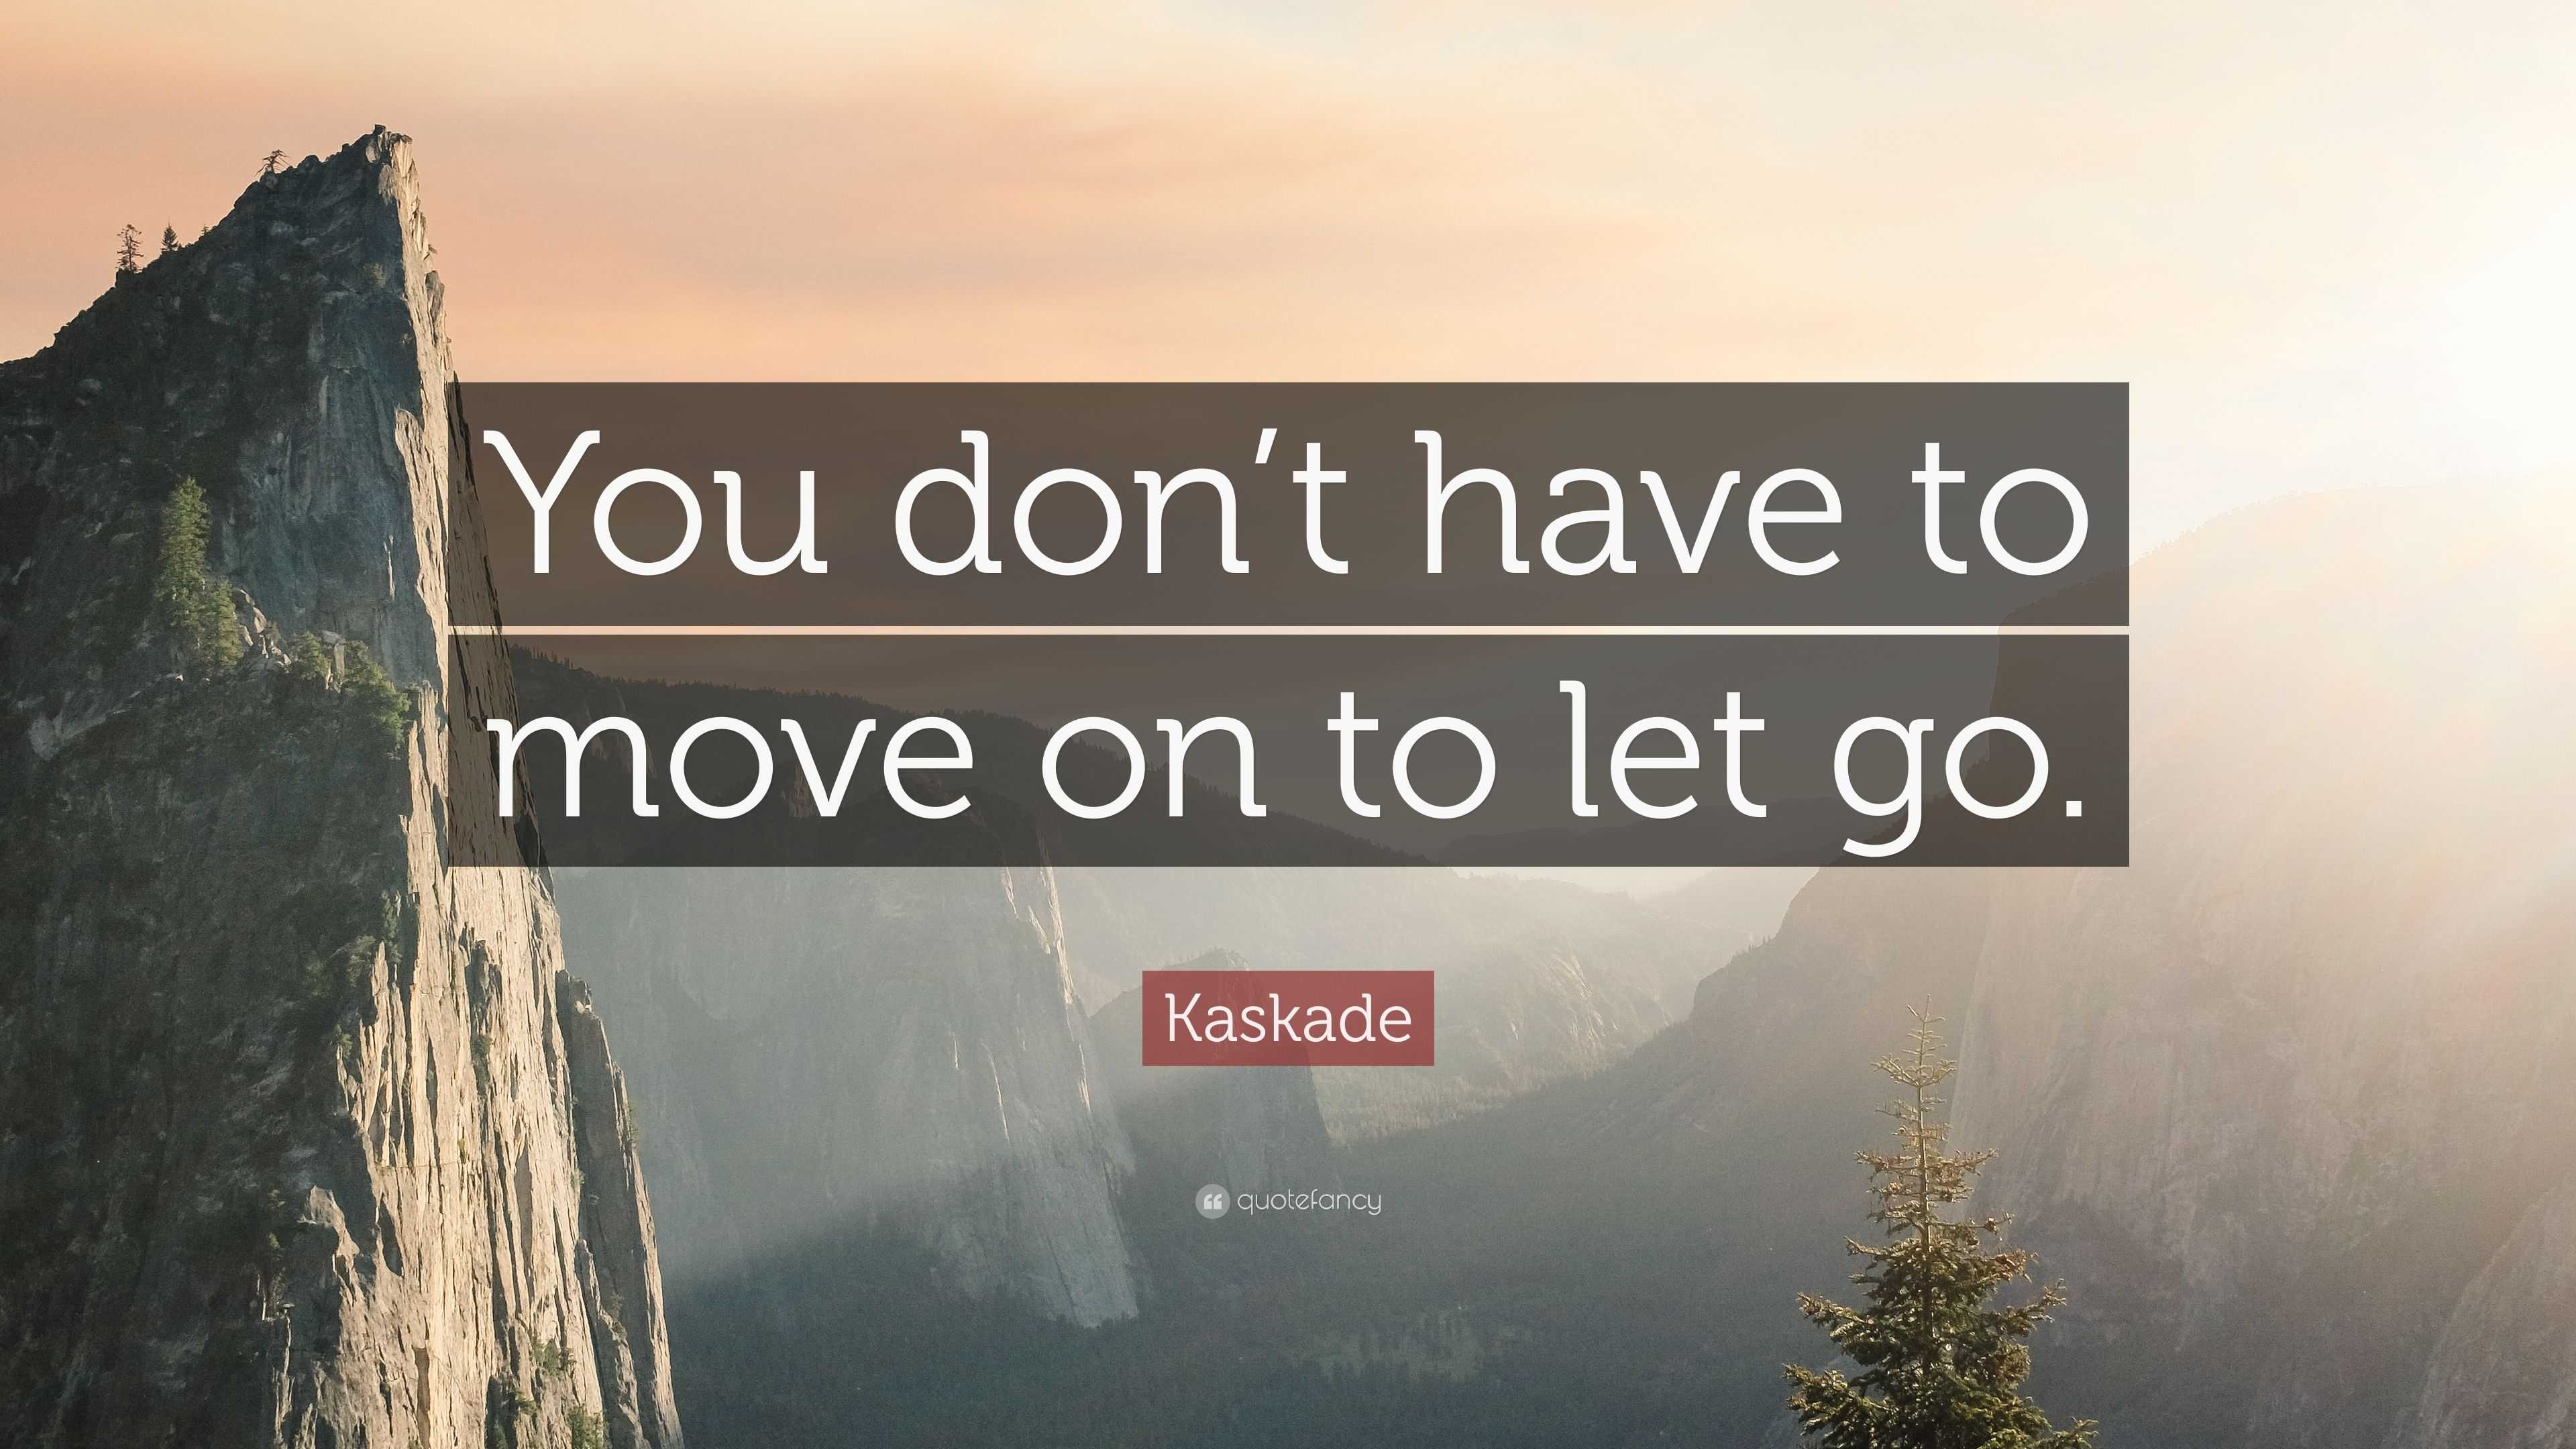 Kaskade Quote: “You don’t have to move on to let go.”